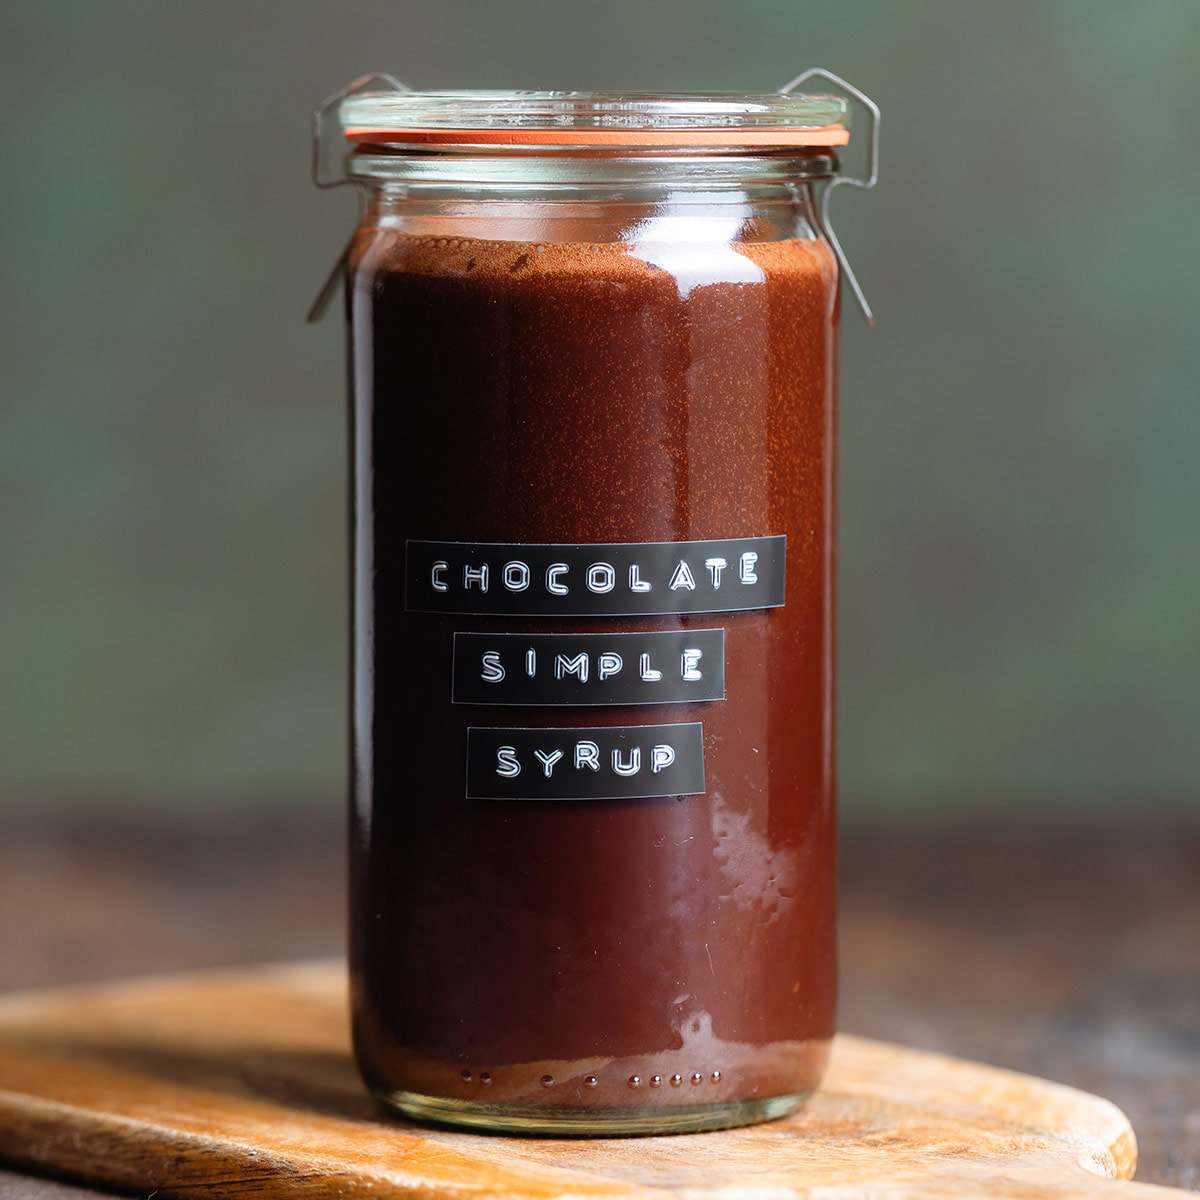 Chocolate syrup in a glass jar with a black and white embossed label on a dark wooden background.